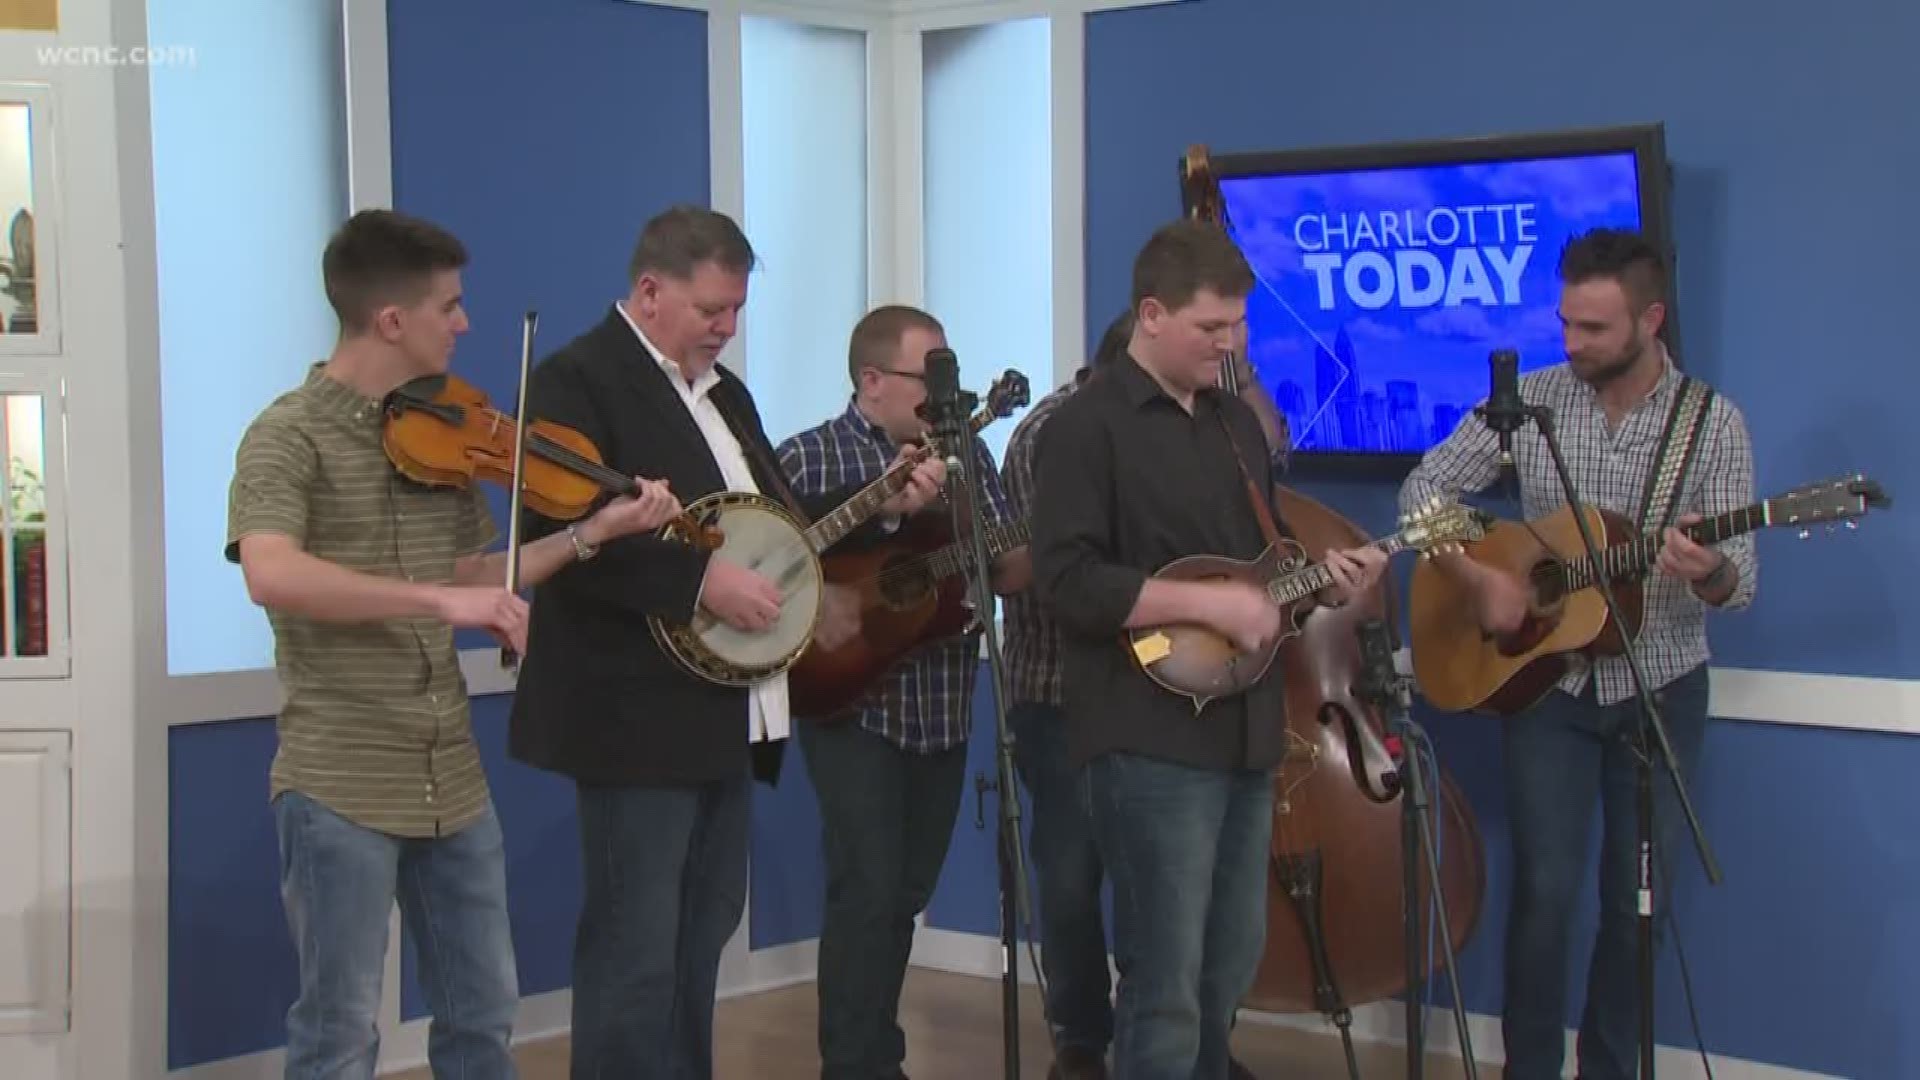 The band Sideline performs and tells us about The Big Lick Bluegrass Festival